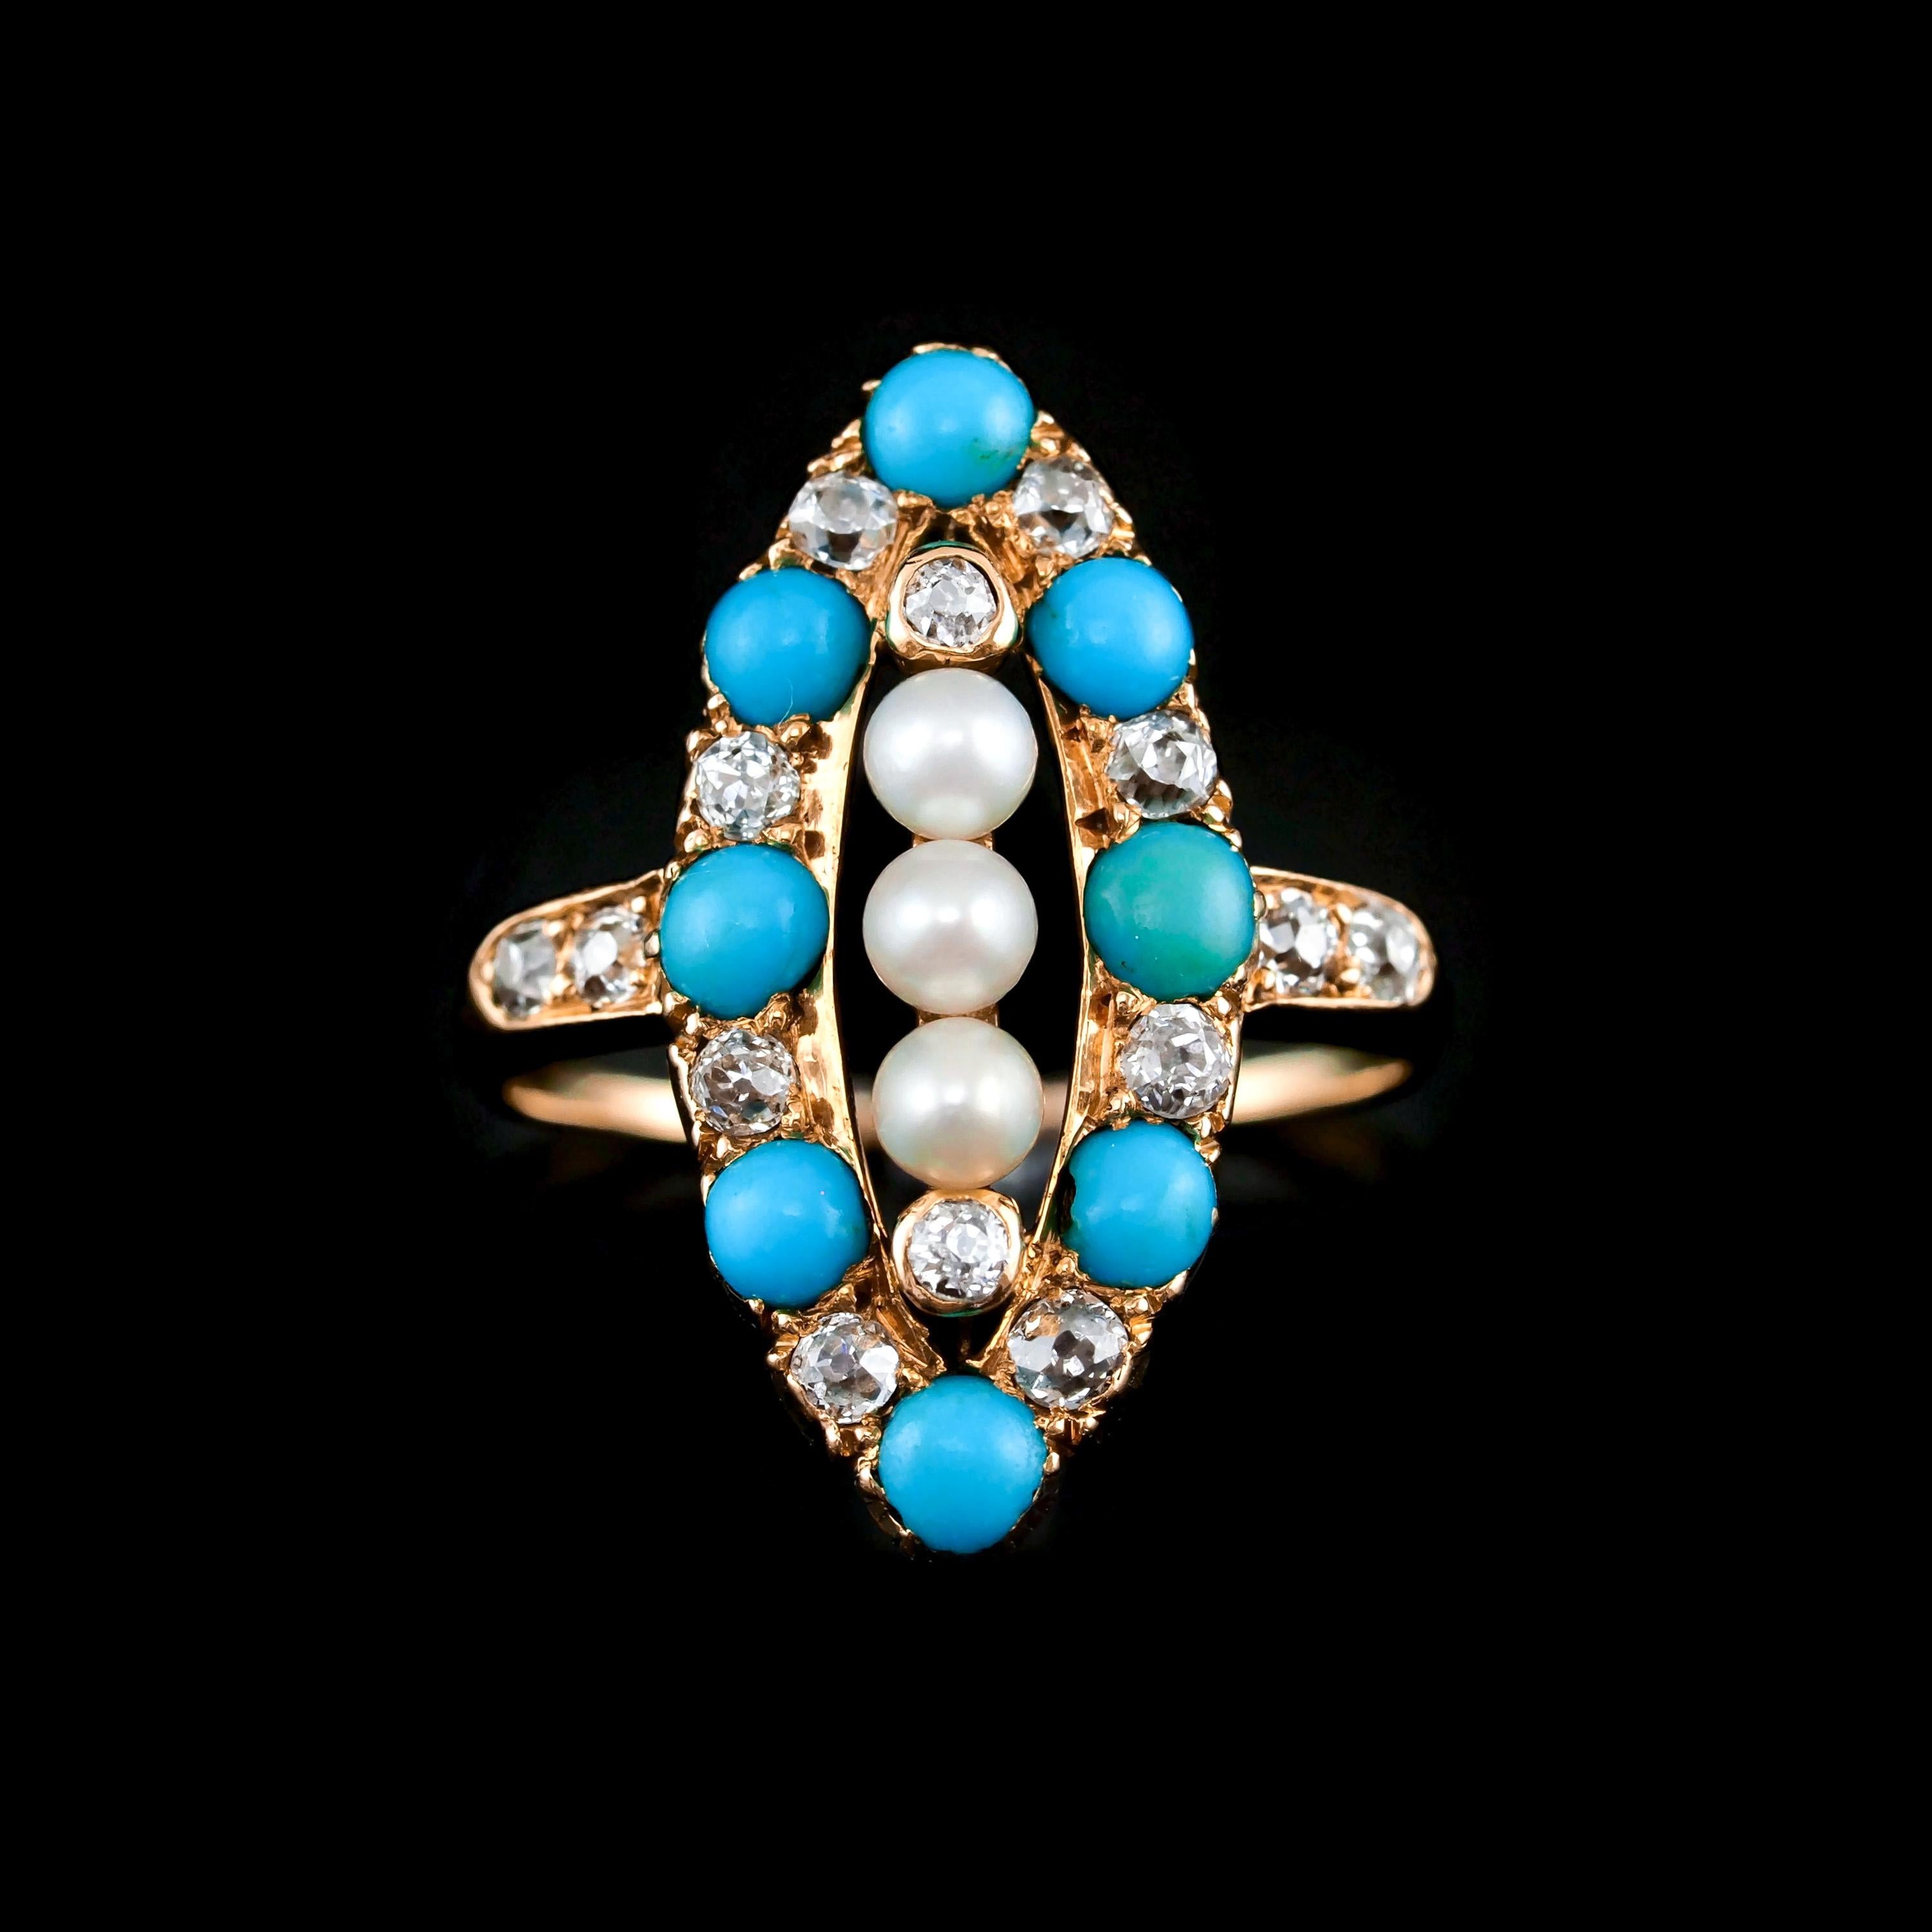 Women's or Men's Antique Victorian Diamond Pearl Turquoise 18K Gold Ring Navette/Marquise c.1880 For Sale